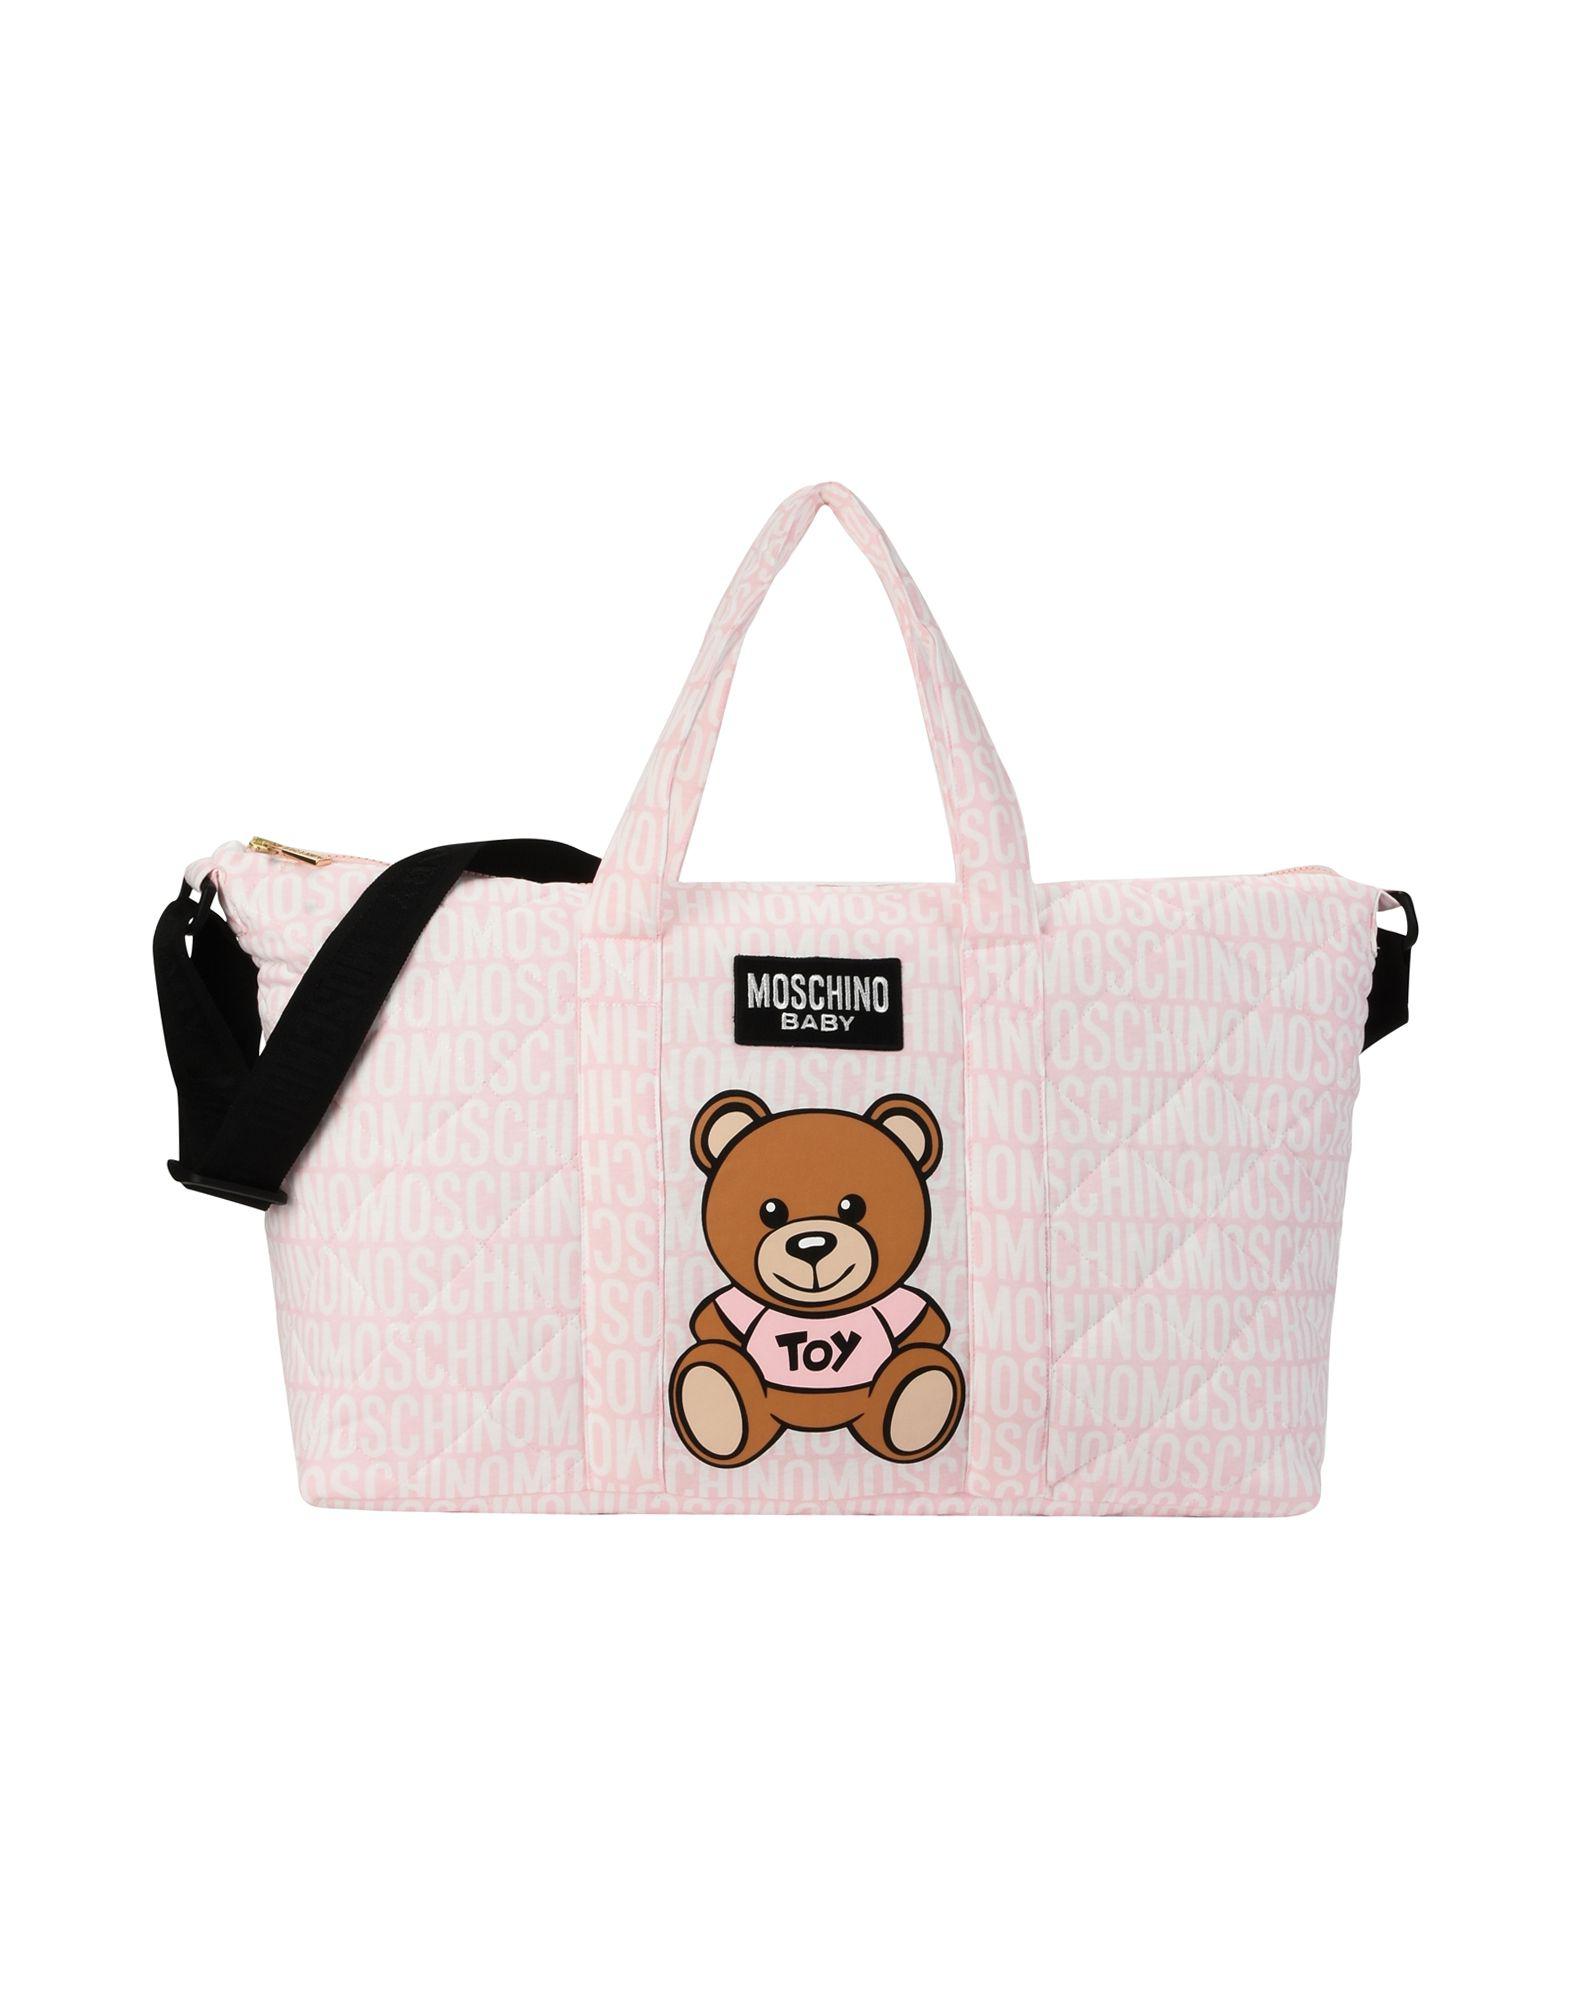 Moschino Cotton Baby Tote Bag in Light 